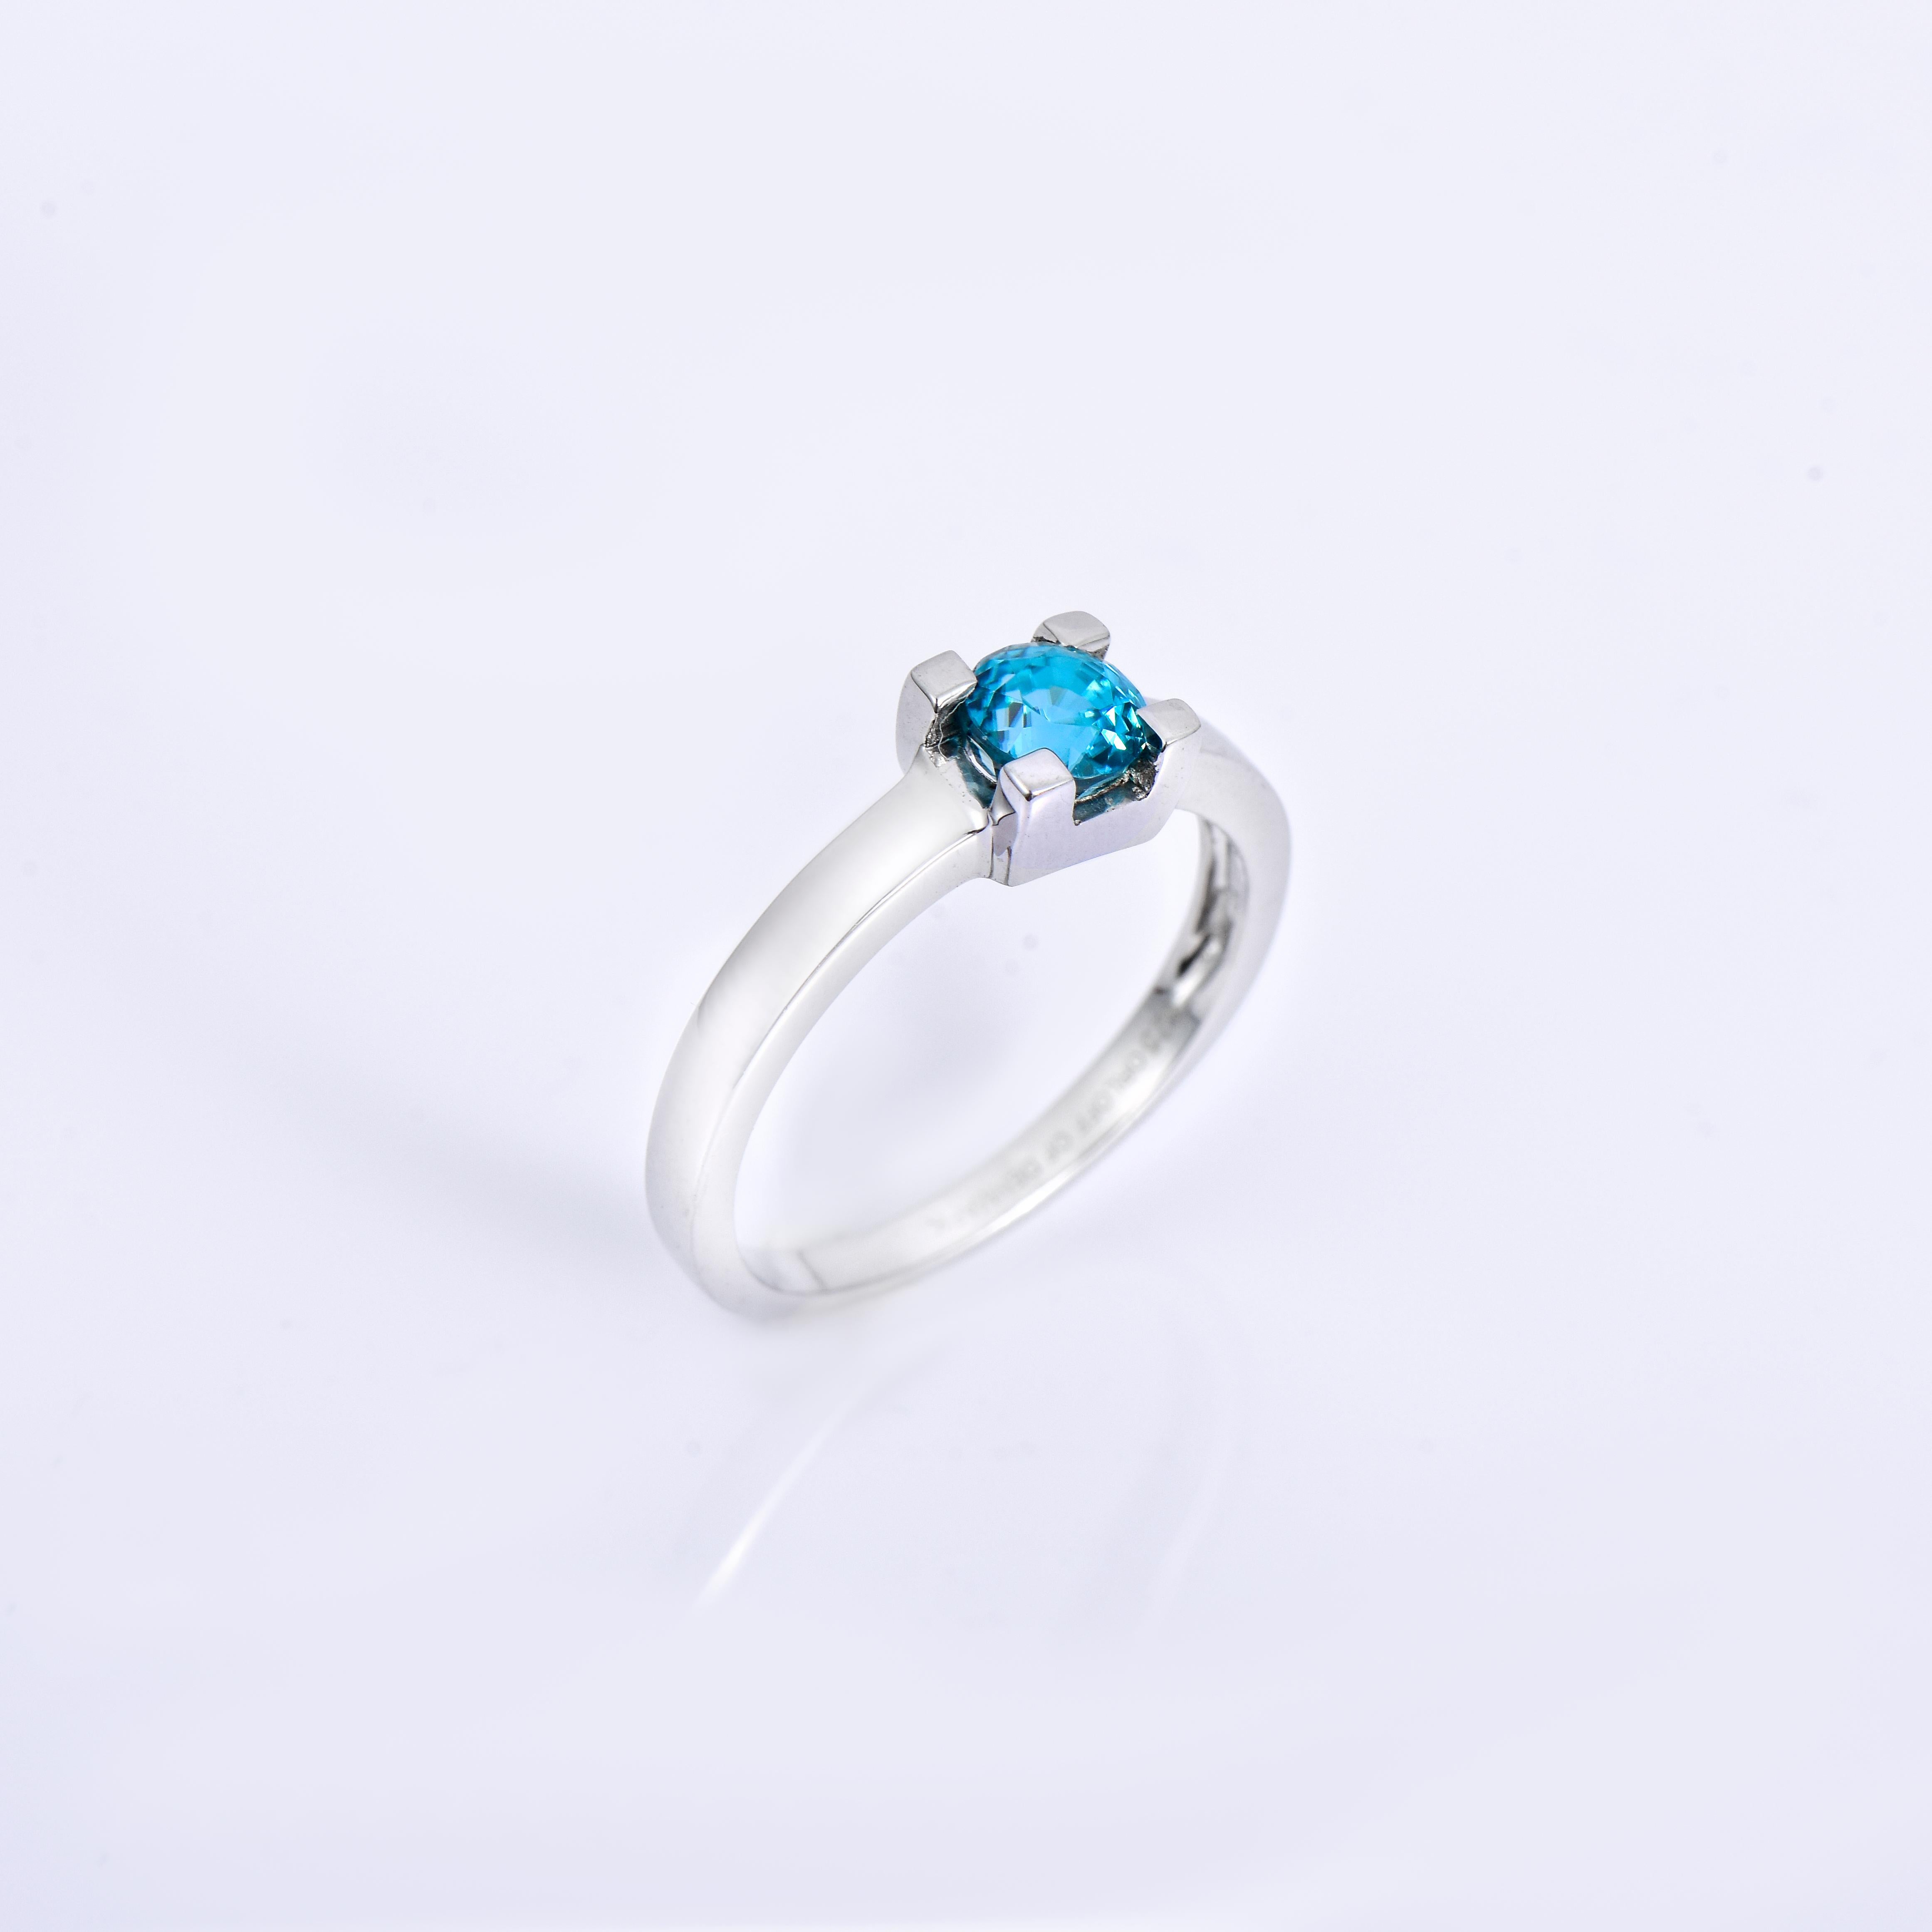 Orloff of Denmark; 925 Sterling Silver Ring set with a 1.09 carat Natural Cambodian Blue Zircon.

This piece has been meticulously hand-crafted out of 925 sterling silver.
In the center sits gorgeous 1.09 carat blue zircon mined, polished, and cut